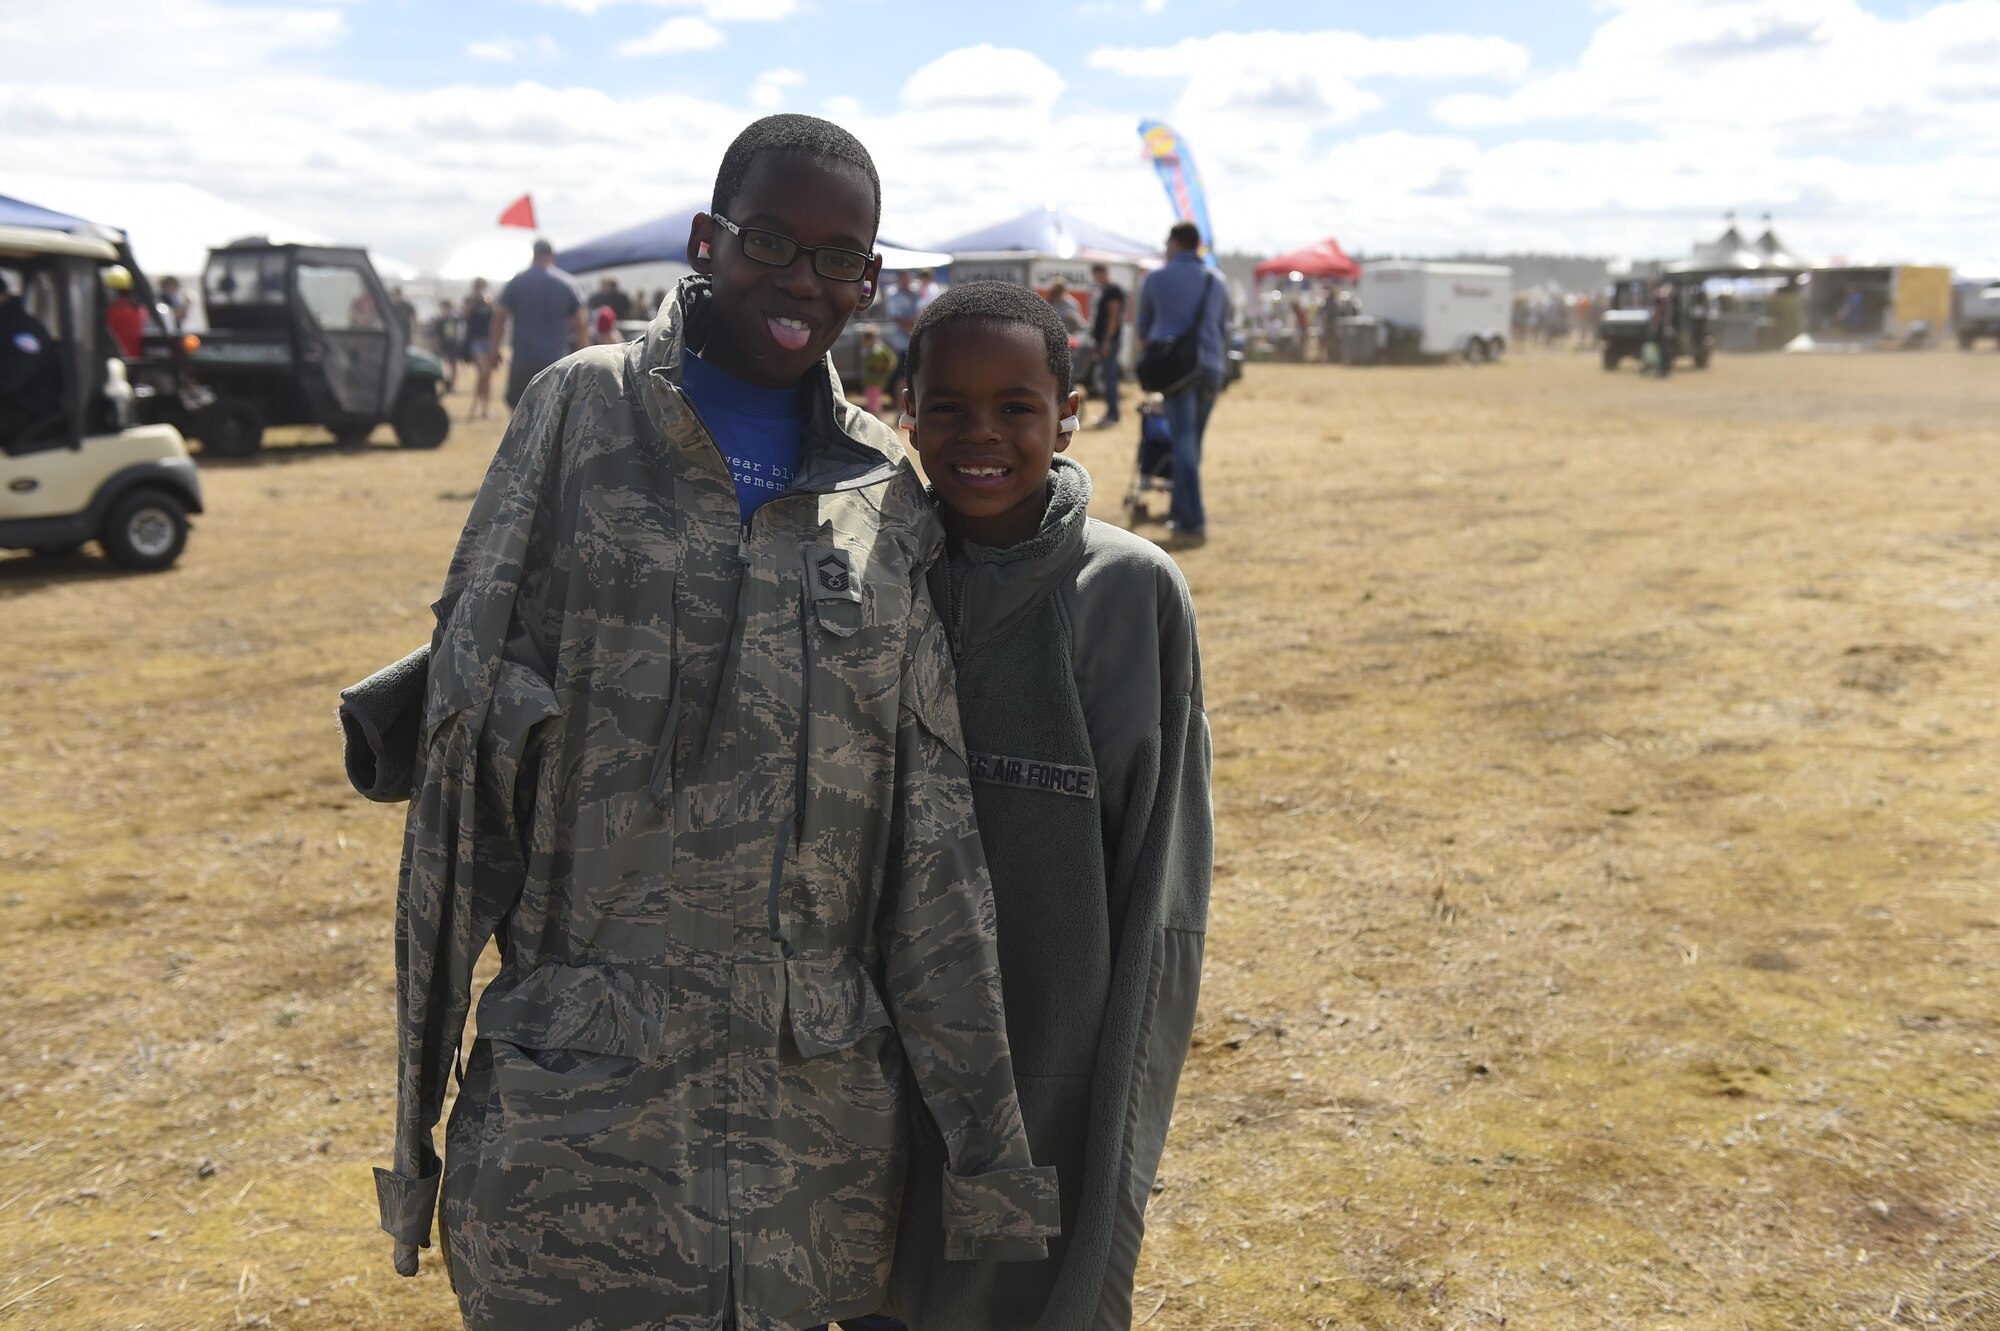 Two brothers walk around during the Joint Base Lewis-McChord Airshow and Warrior Expo Aug. 27, 2016, at JBLM, Wash. The Airshow and Warrior Expo drew crowds from across the state of Washington to the base for the various air show demonstrations. (U.S. Air Force photo/Staff Sgt. Naomi Shipley)